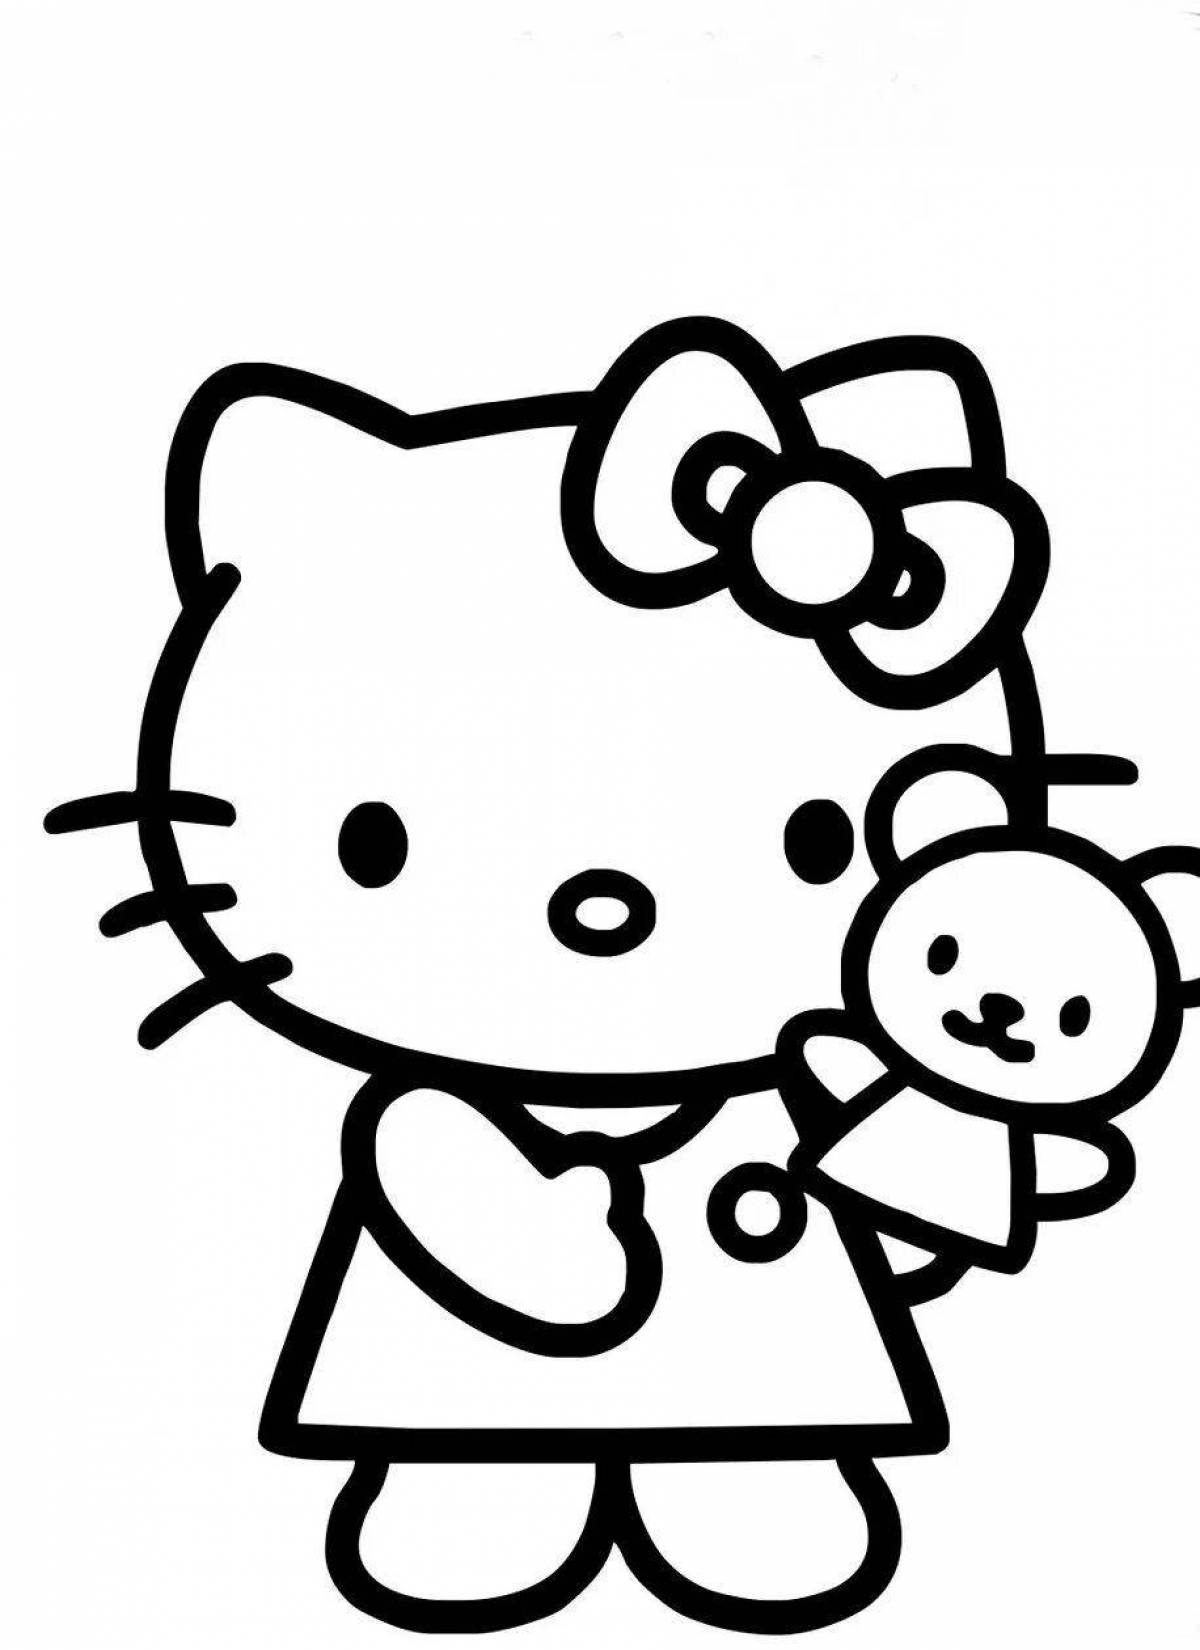 Milady from hello kitty #3